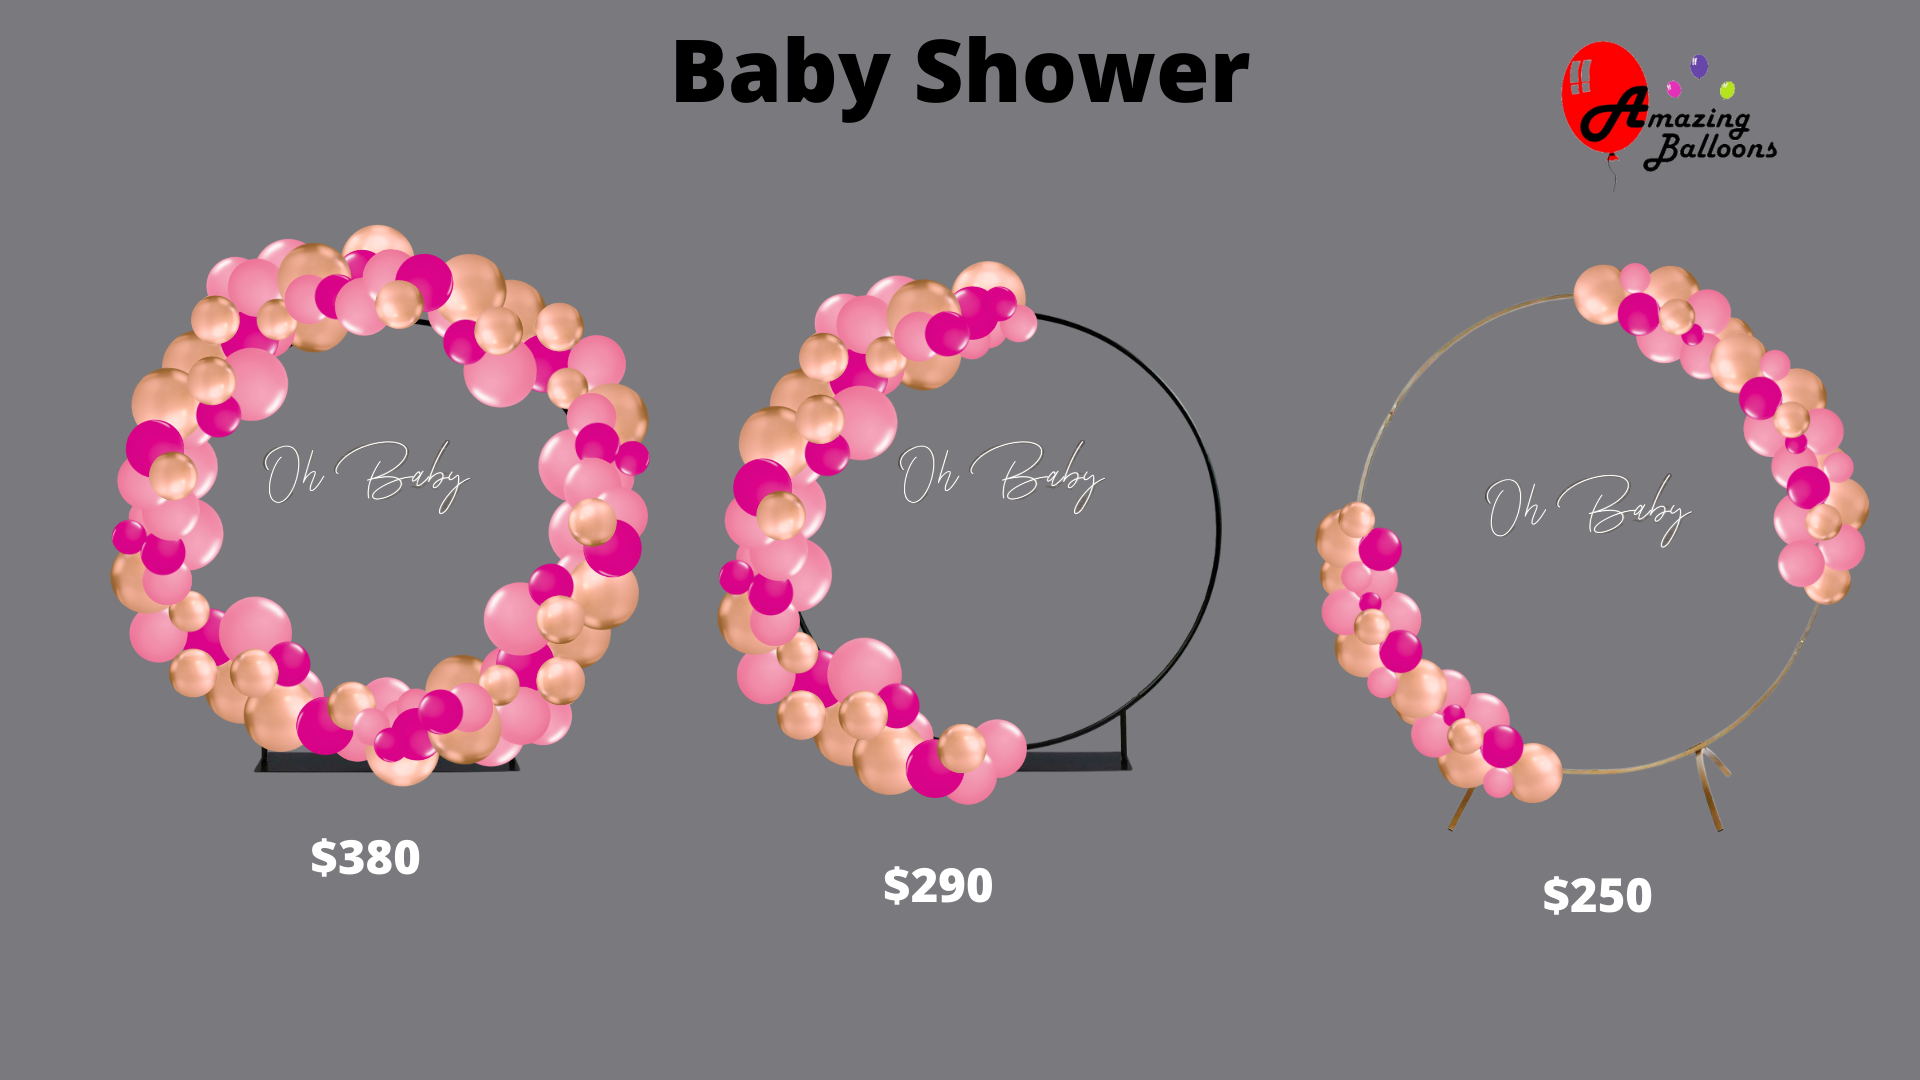 Baby Shower and Gender Reveal Prices